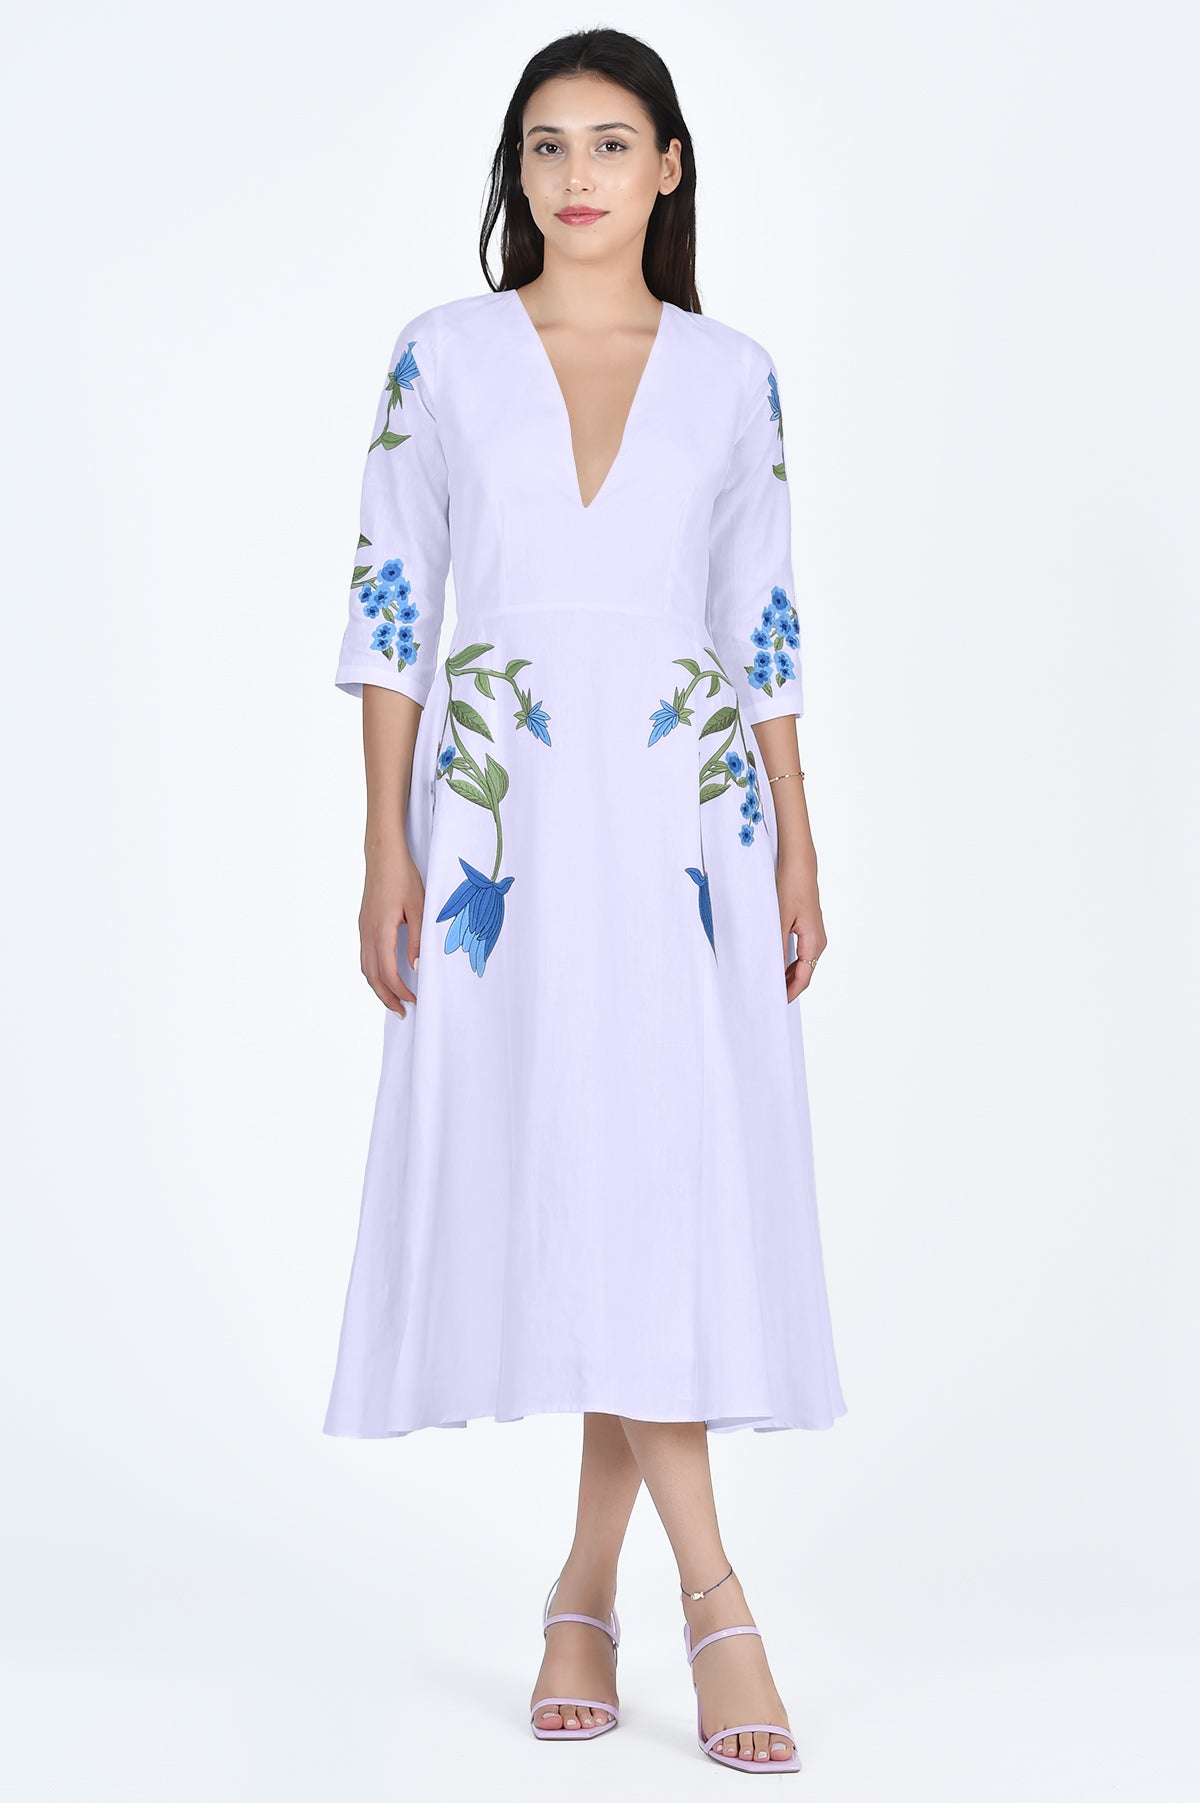 Fanm Mon Veronica Dress in Lilac with Blue Floral Embroidery 